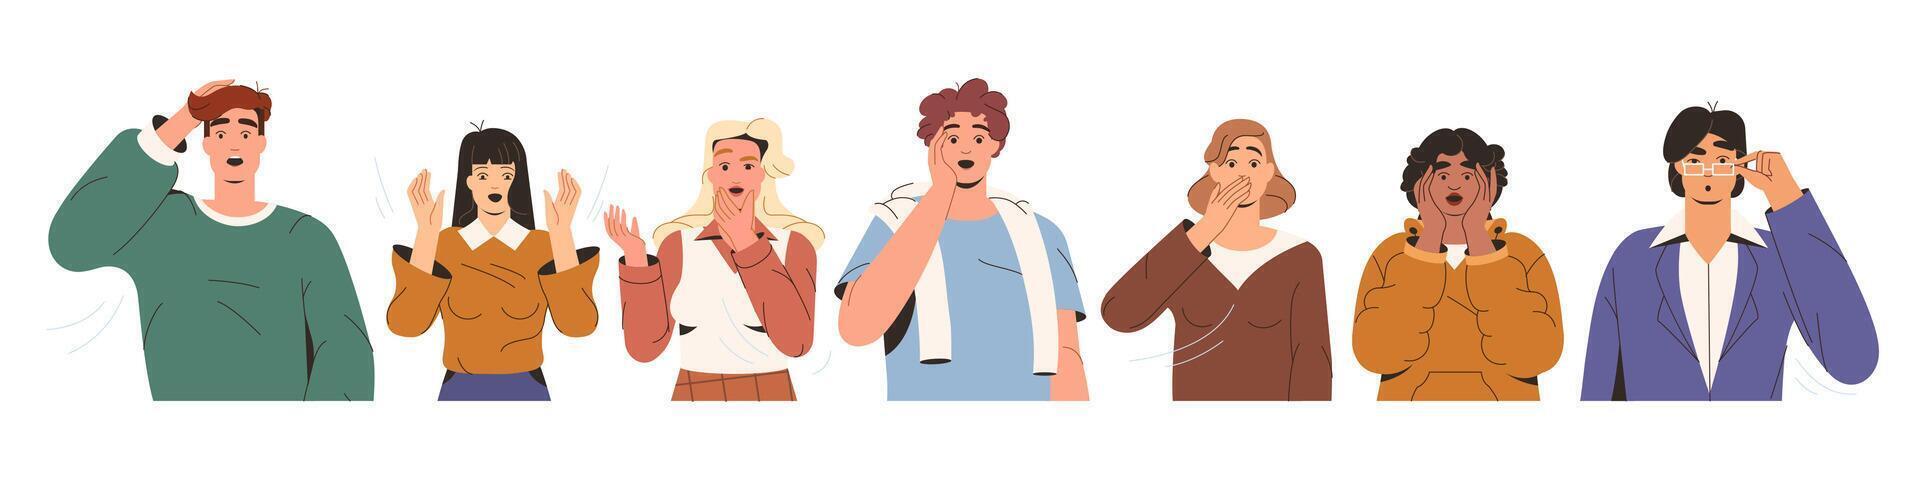 Flat portraits of shocked scared people faces. Excited and wondered characters. Young frightened people with open mouths, emotional gestures, reactions. Amazed men and women of different nationalities vector